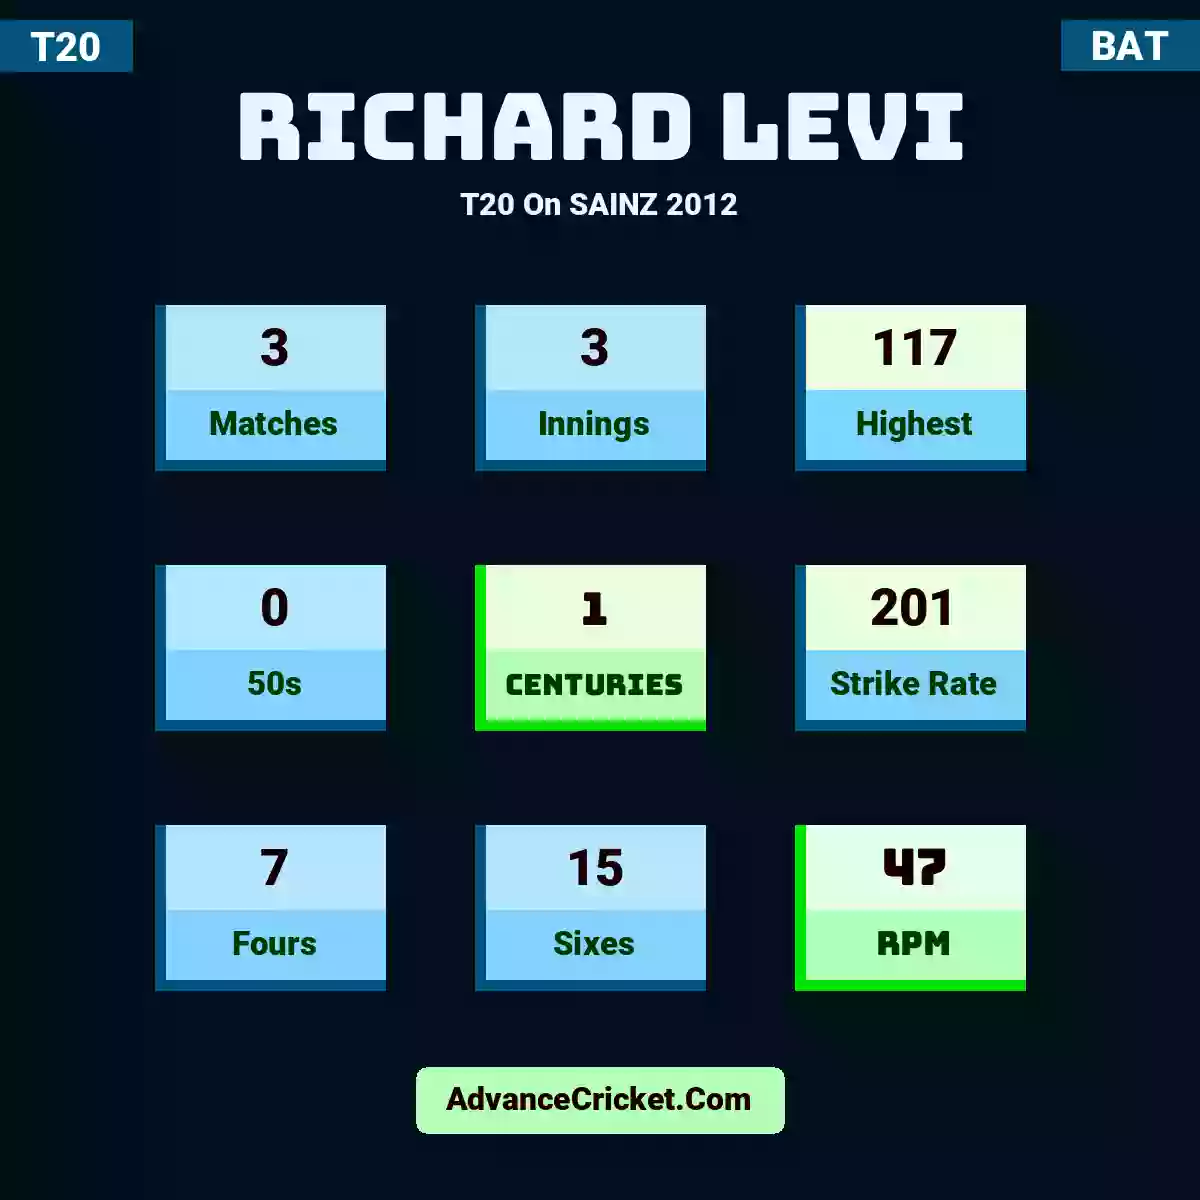 Richard Levi T20  On SAINZ 2012, Richard Levi played 3 matches, scored 117 runs as highest, 0 half-centuries, and 1 centuries, with a strike rate of 201. R.Levi hit 7 fours and 15 sixes, with an RPM of 47.